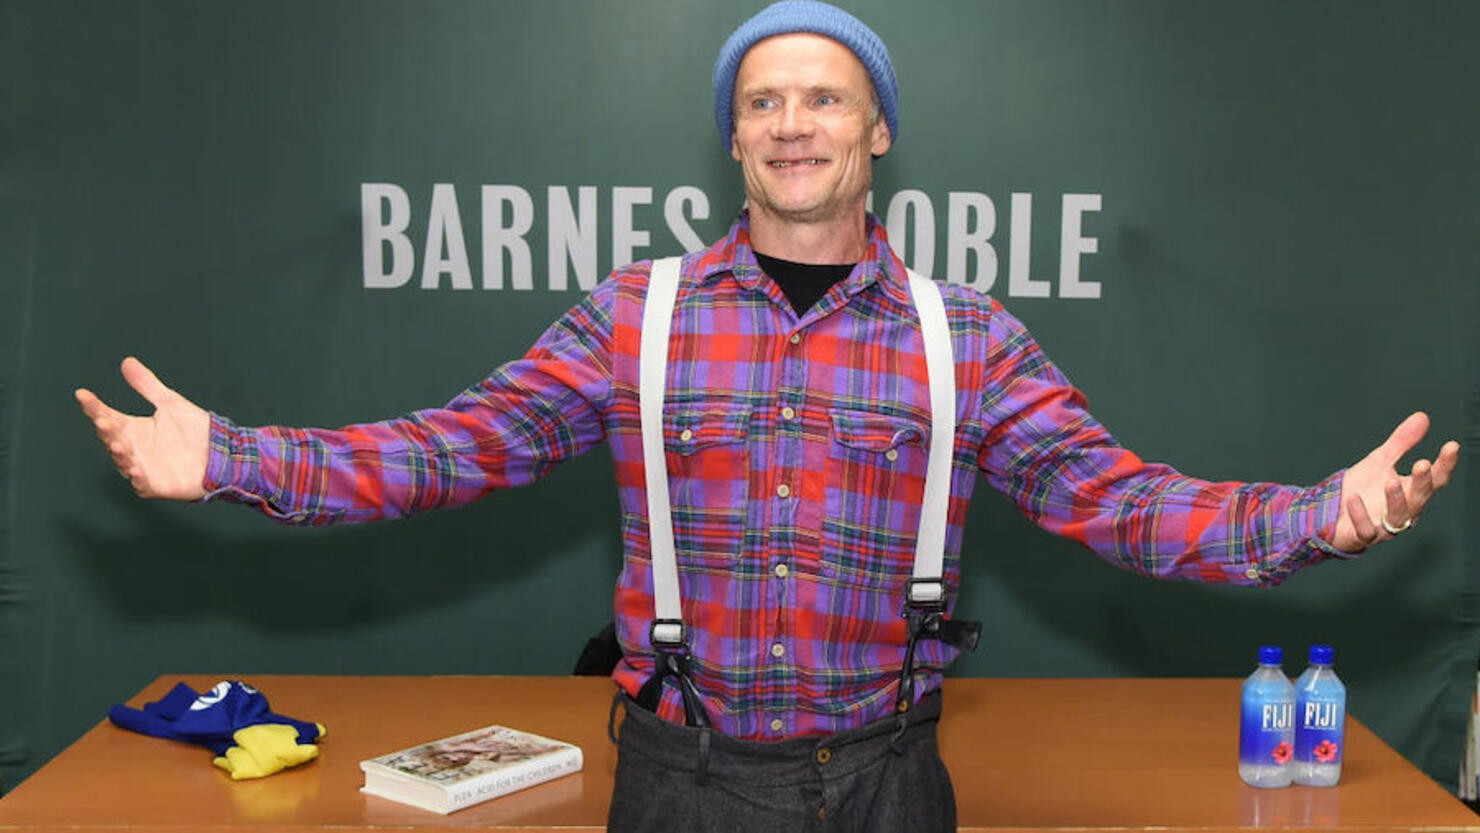 Flea Signs Copies Of His New Book "Acid For The Children"